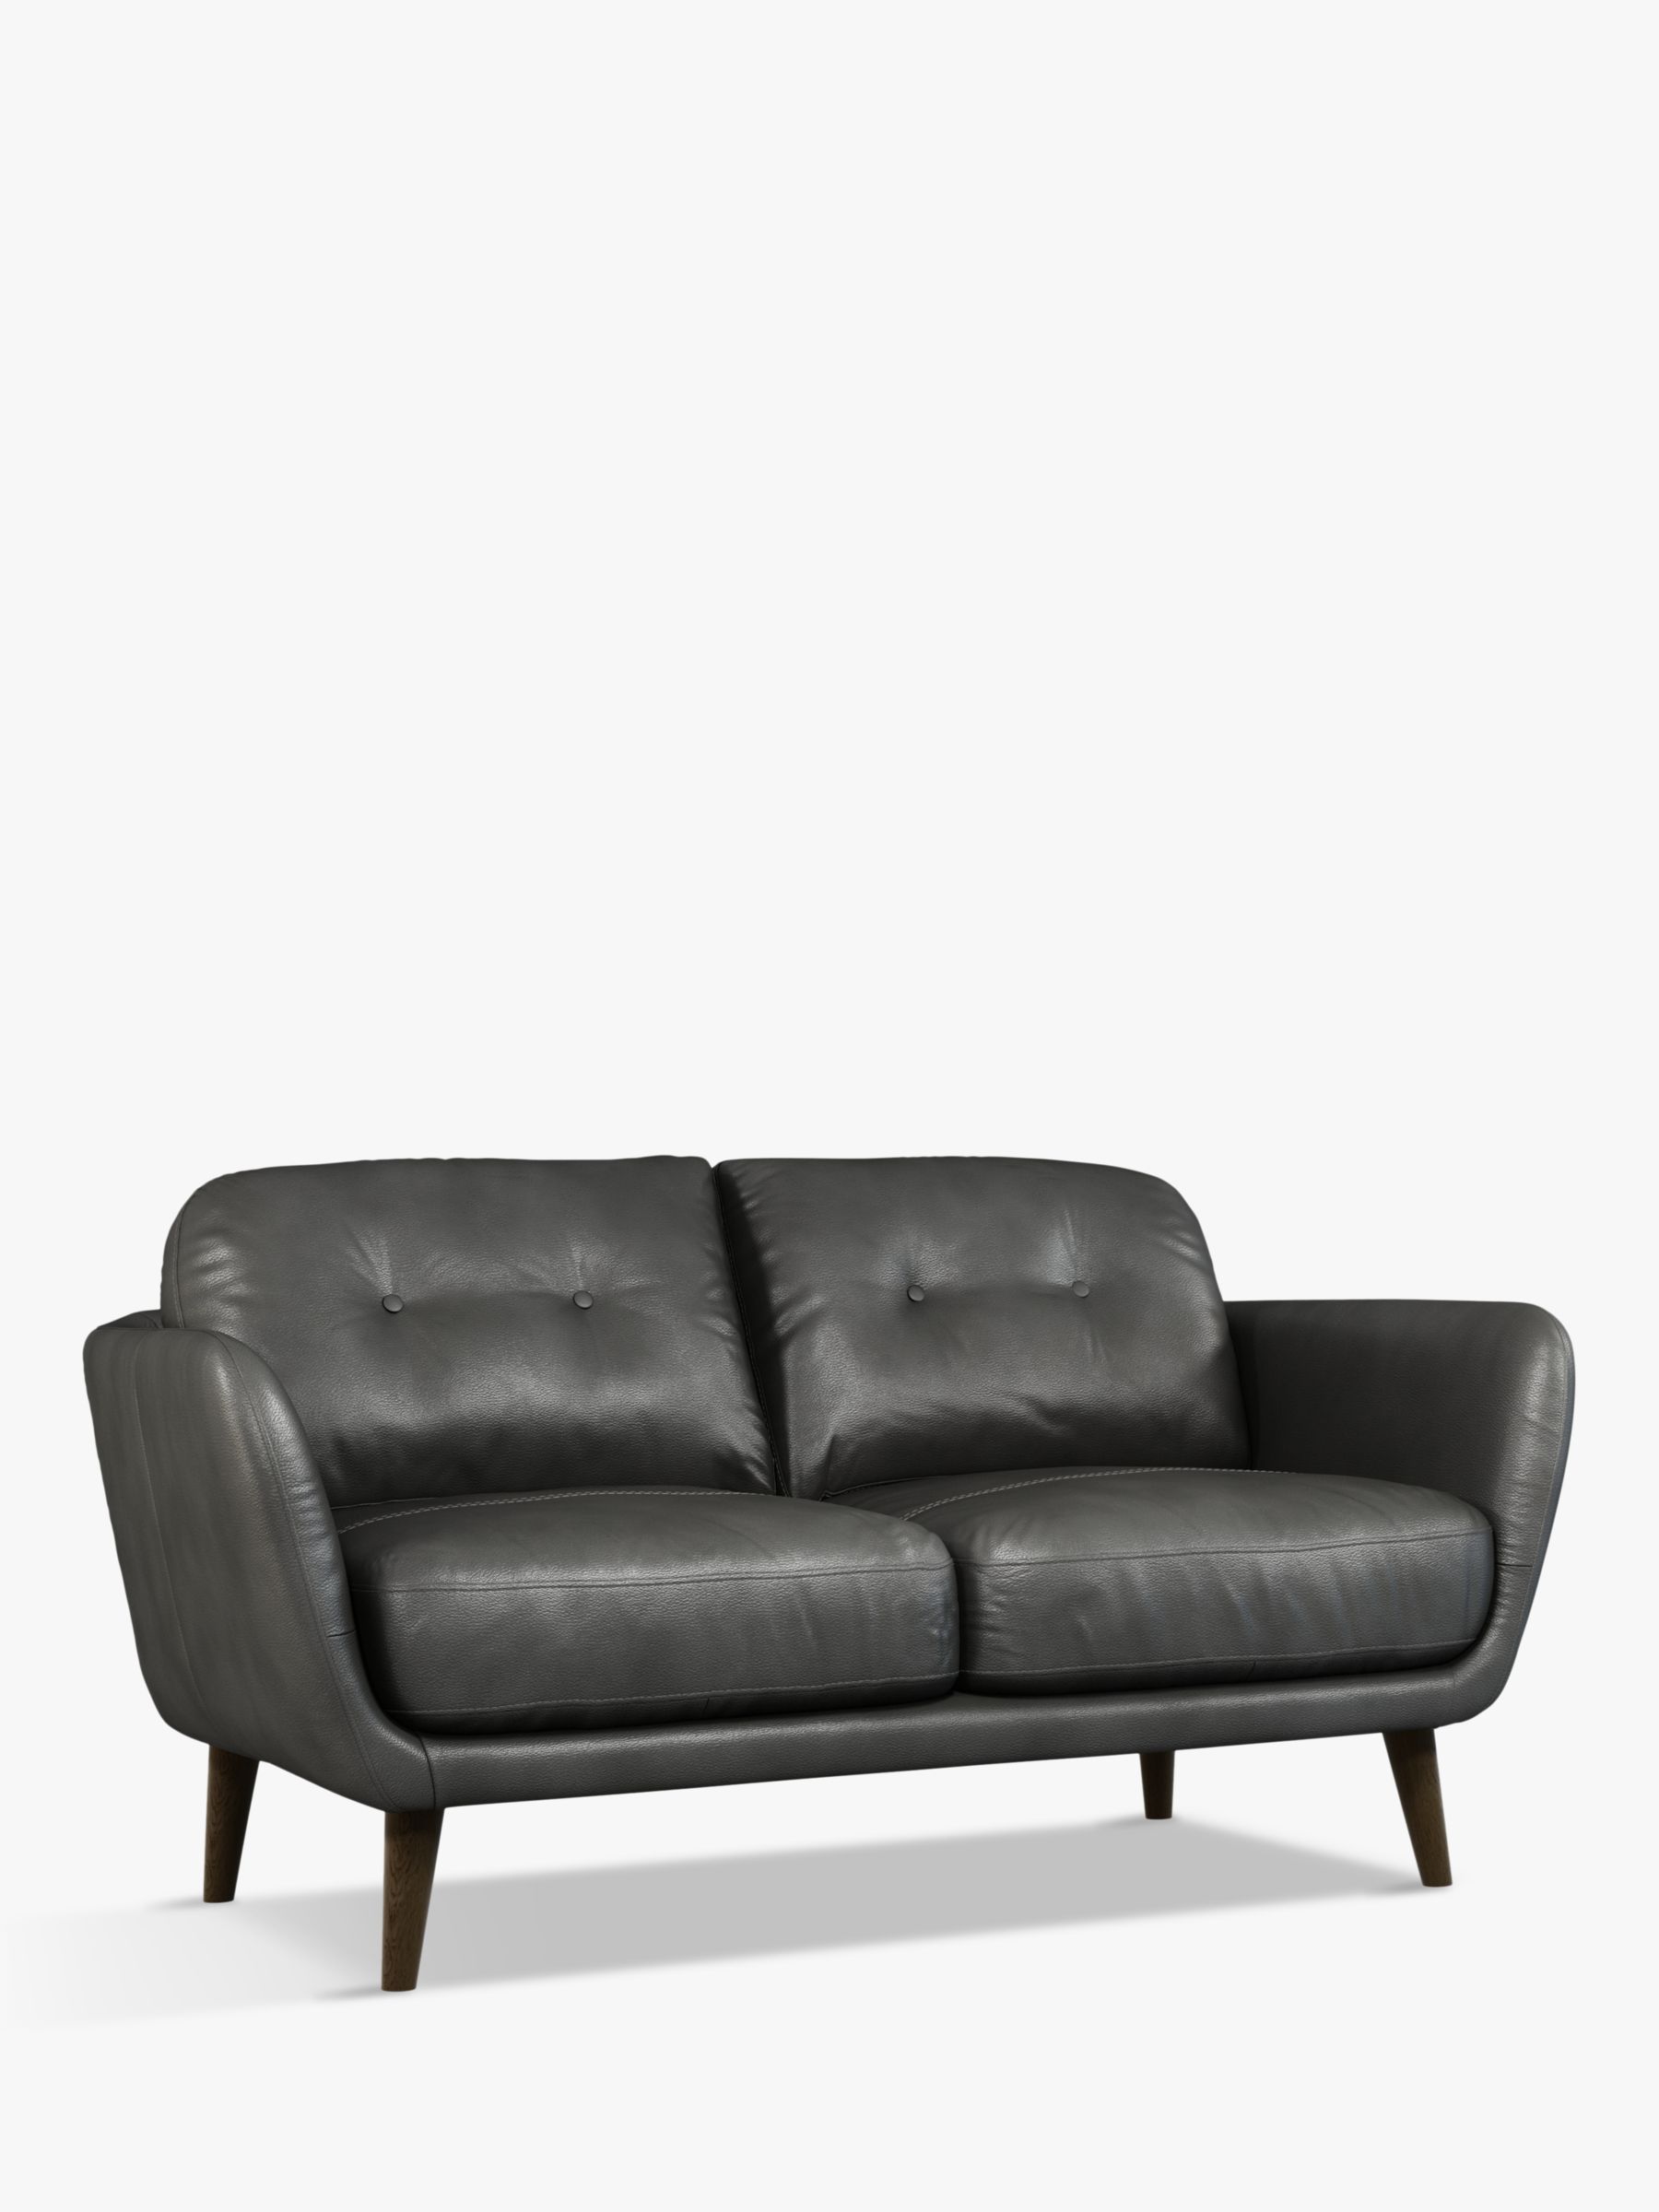 2 Seater Leather Sofa Dark Leg, Small Leather Couch